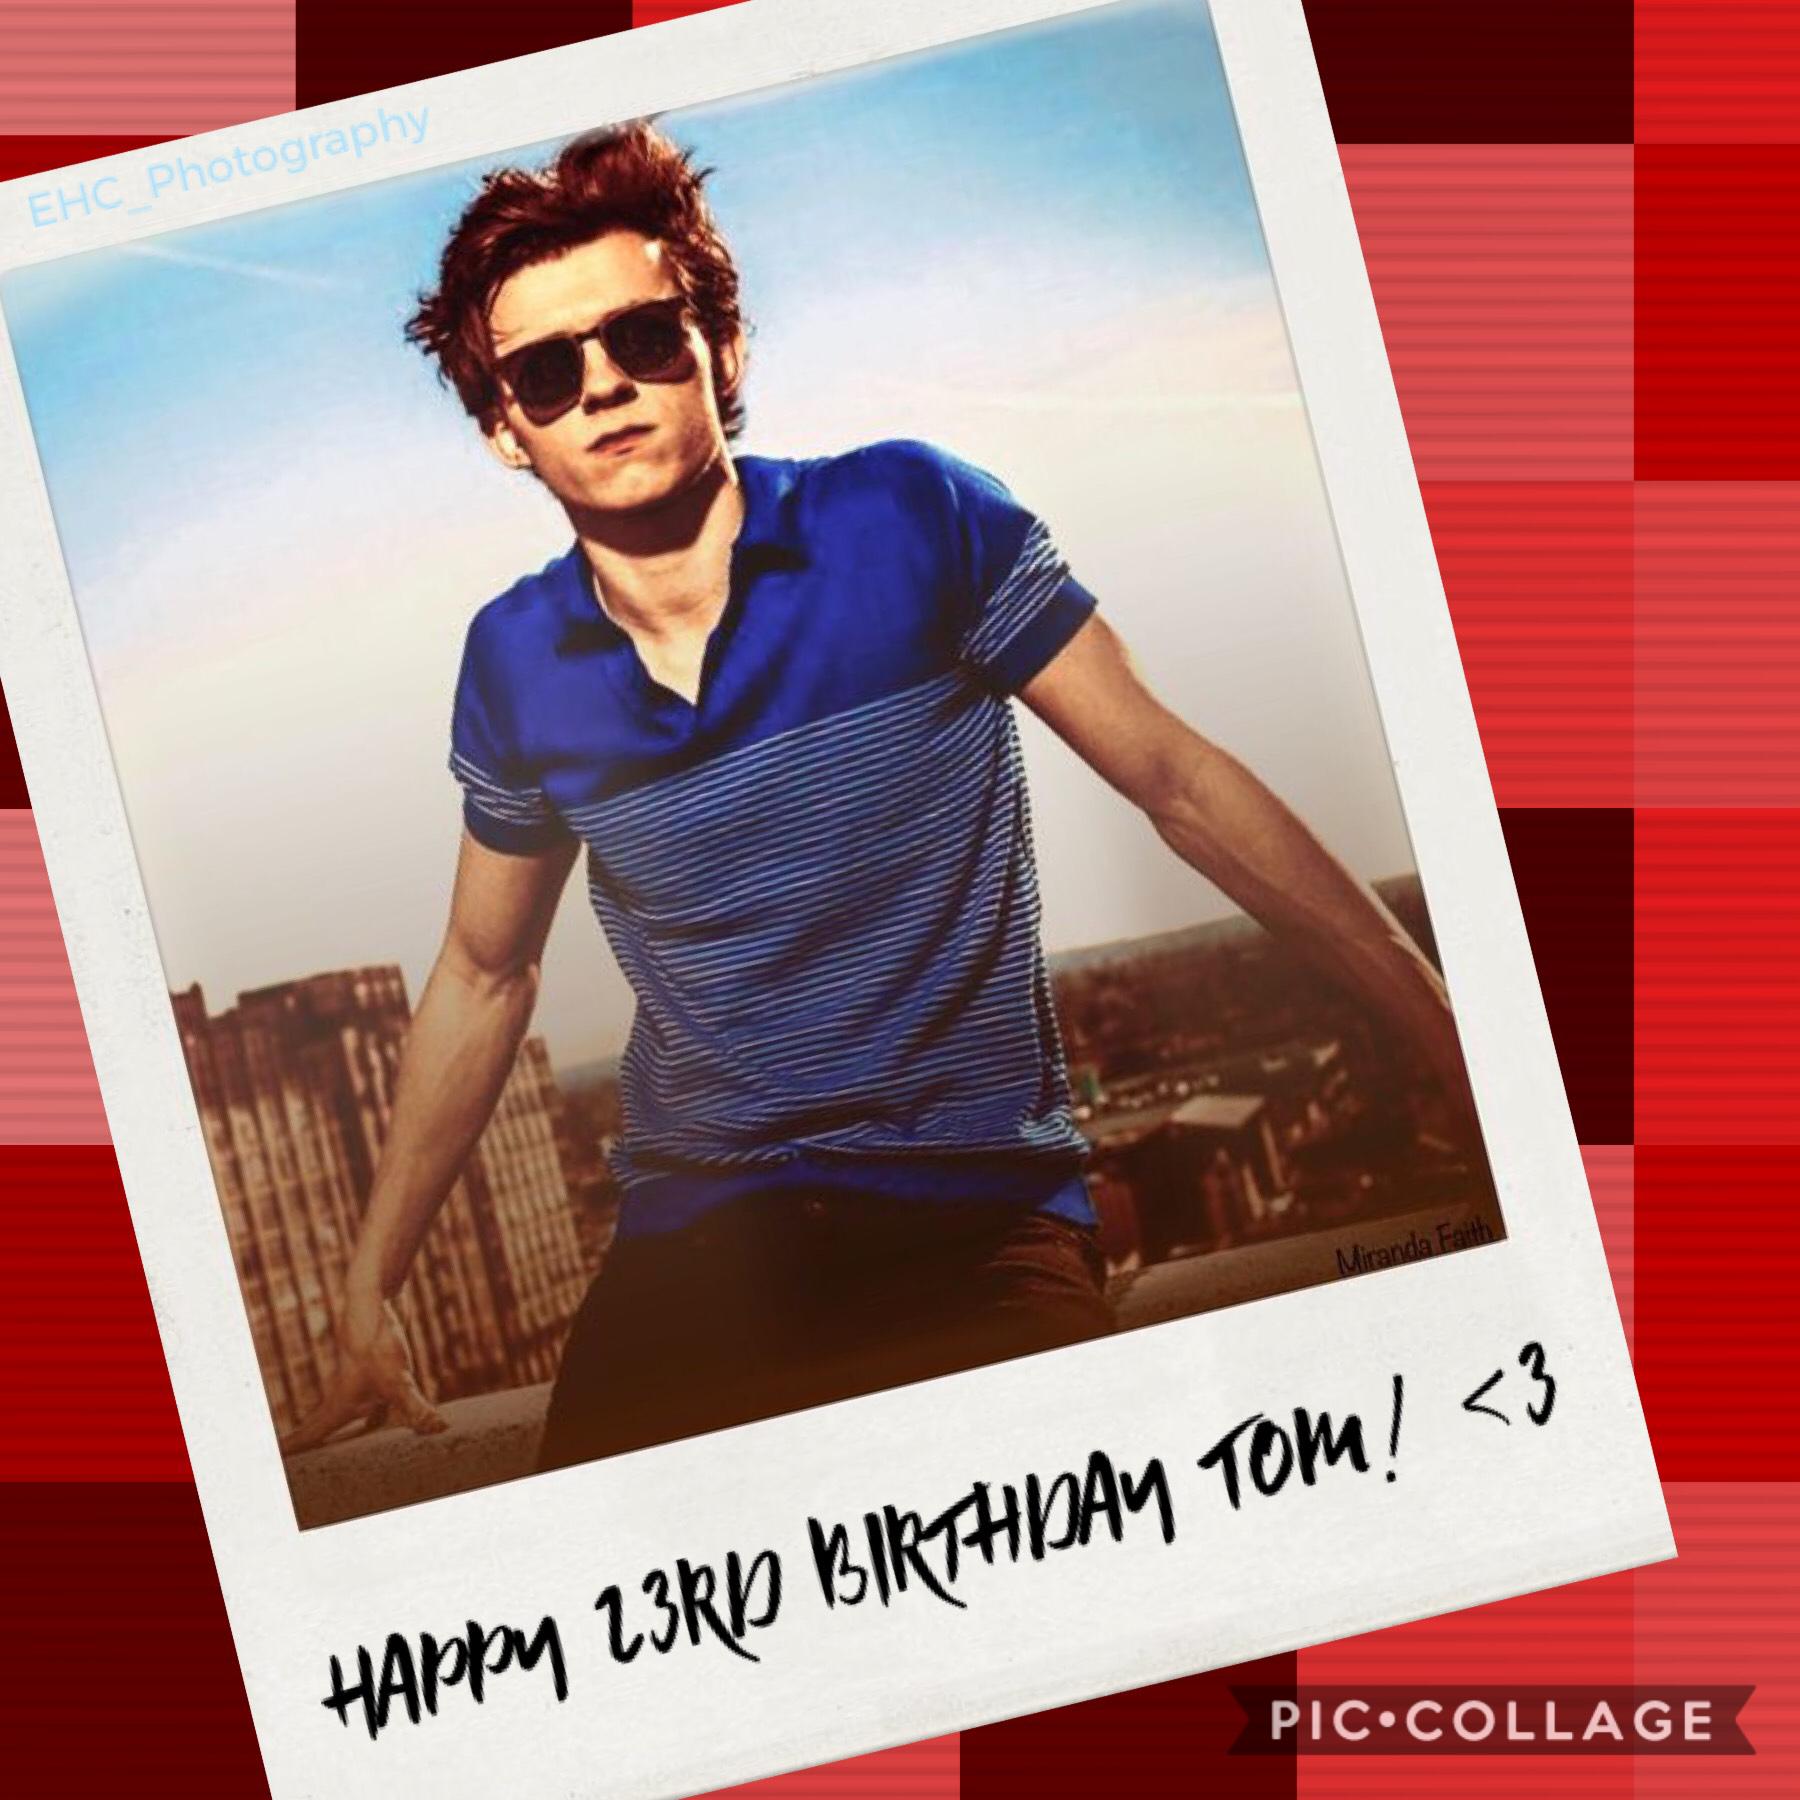 ( This is a day late like last year’s edit... 😅 ) Anyways, HAPPY 23RD BIRTHDAY TO OUR TOM BEAN BABY❗️😎 🎂 ♥️ 2️⃣3️⃣ 🥳 🎈 📆 🕷